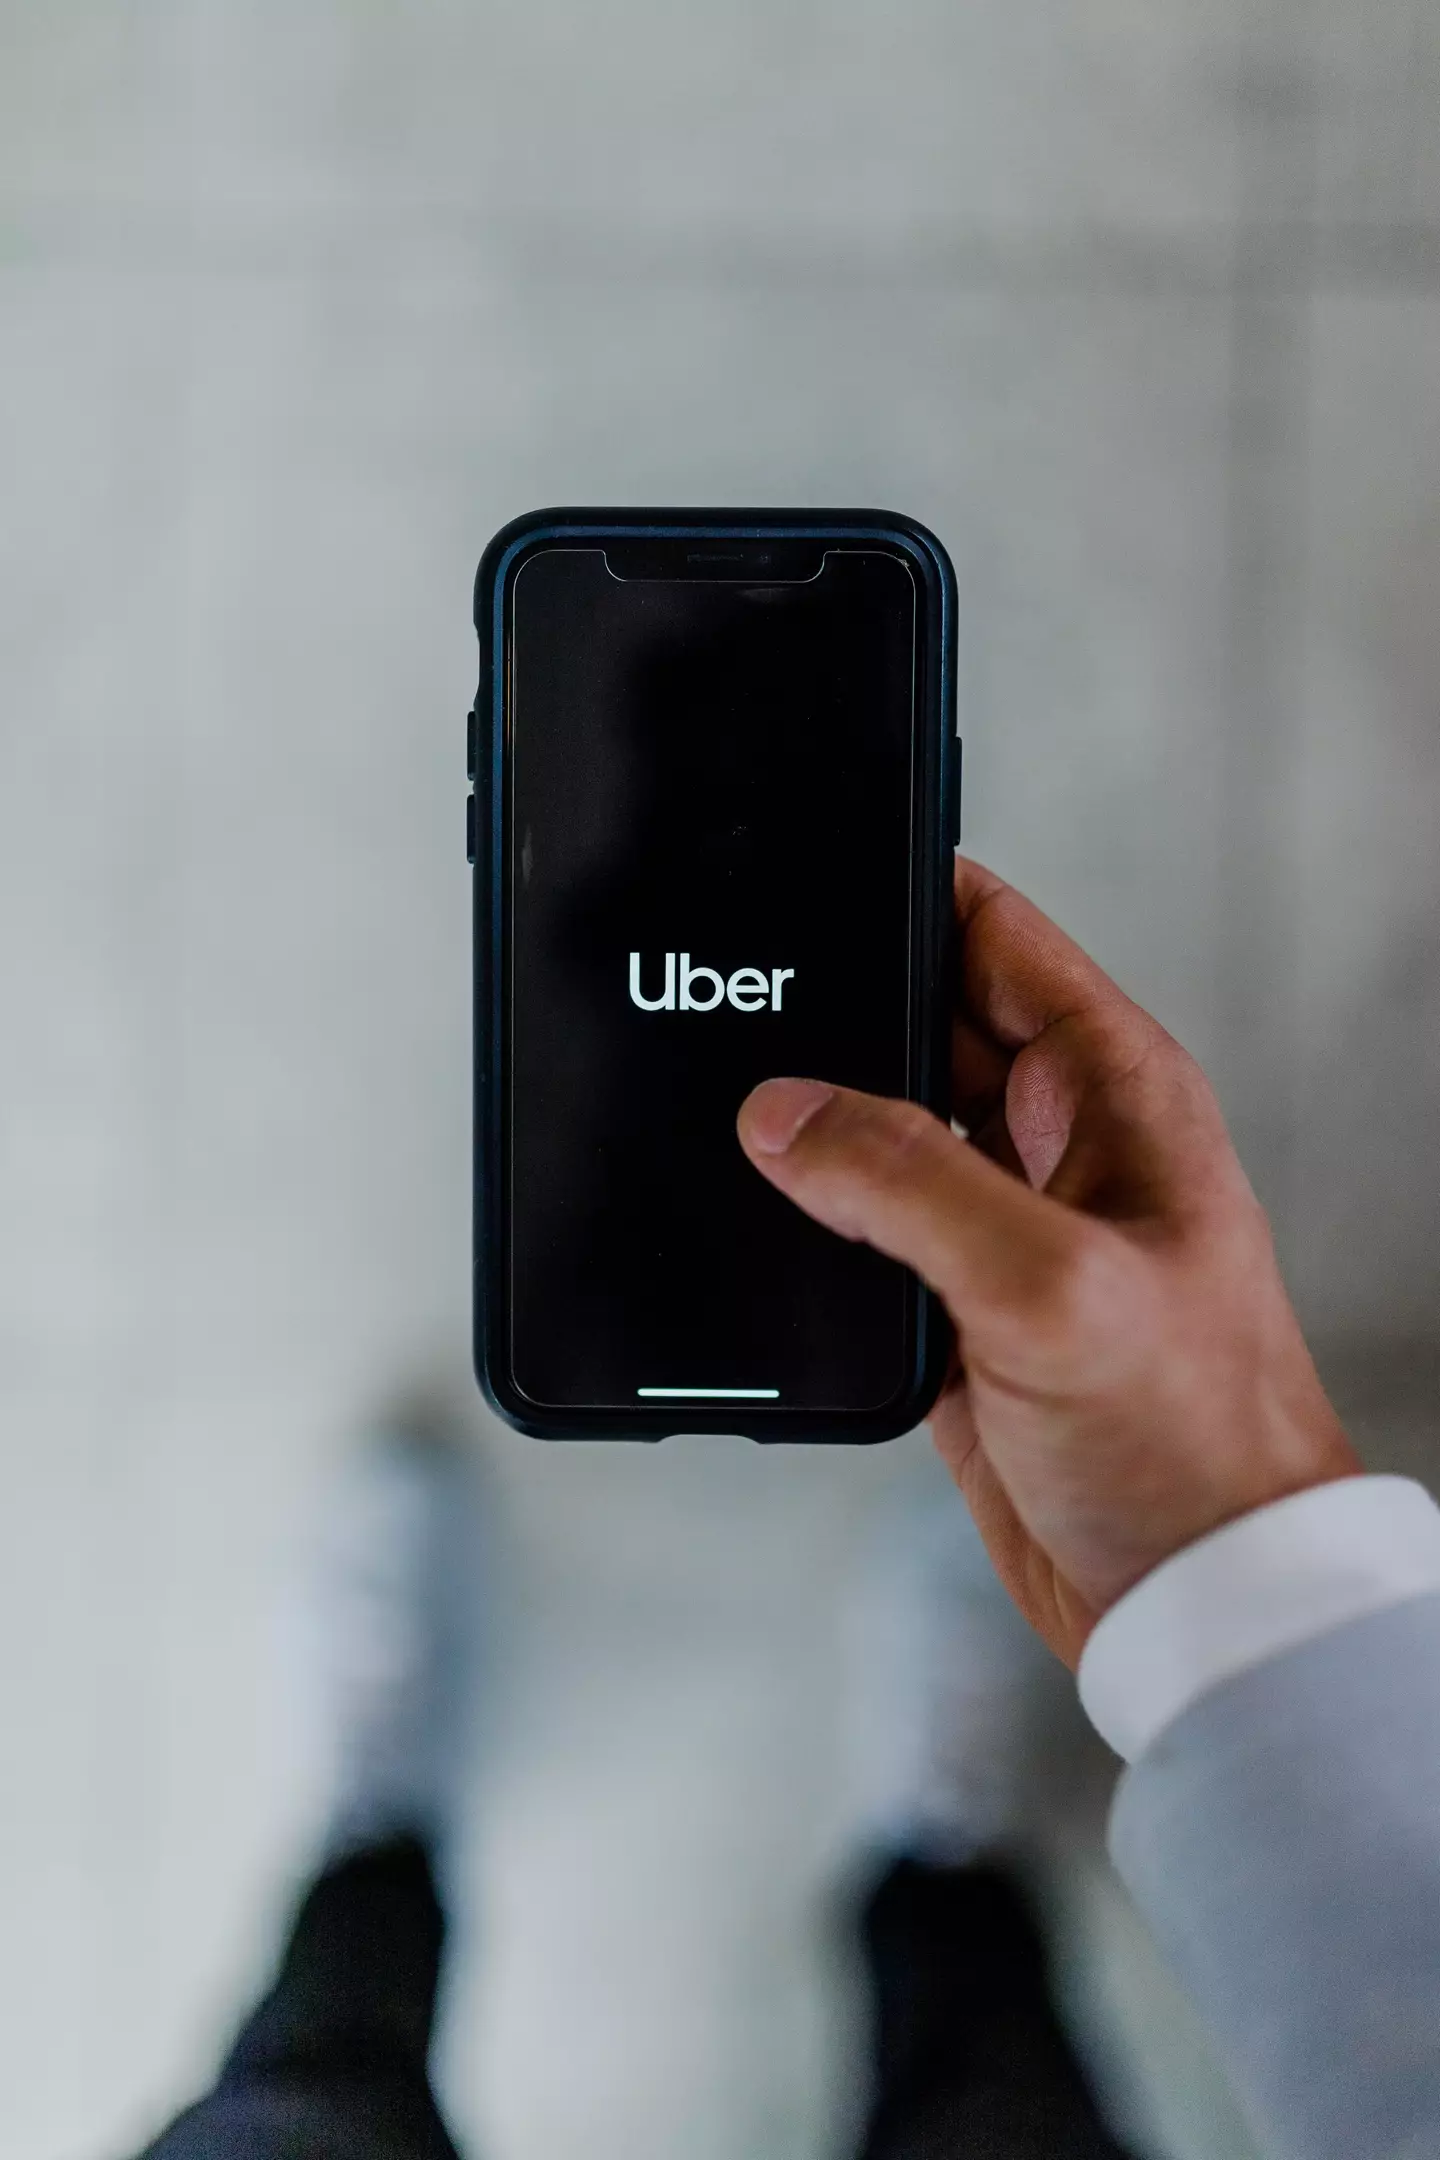 If you need help getting an Uber home, Home Safe is here to help (